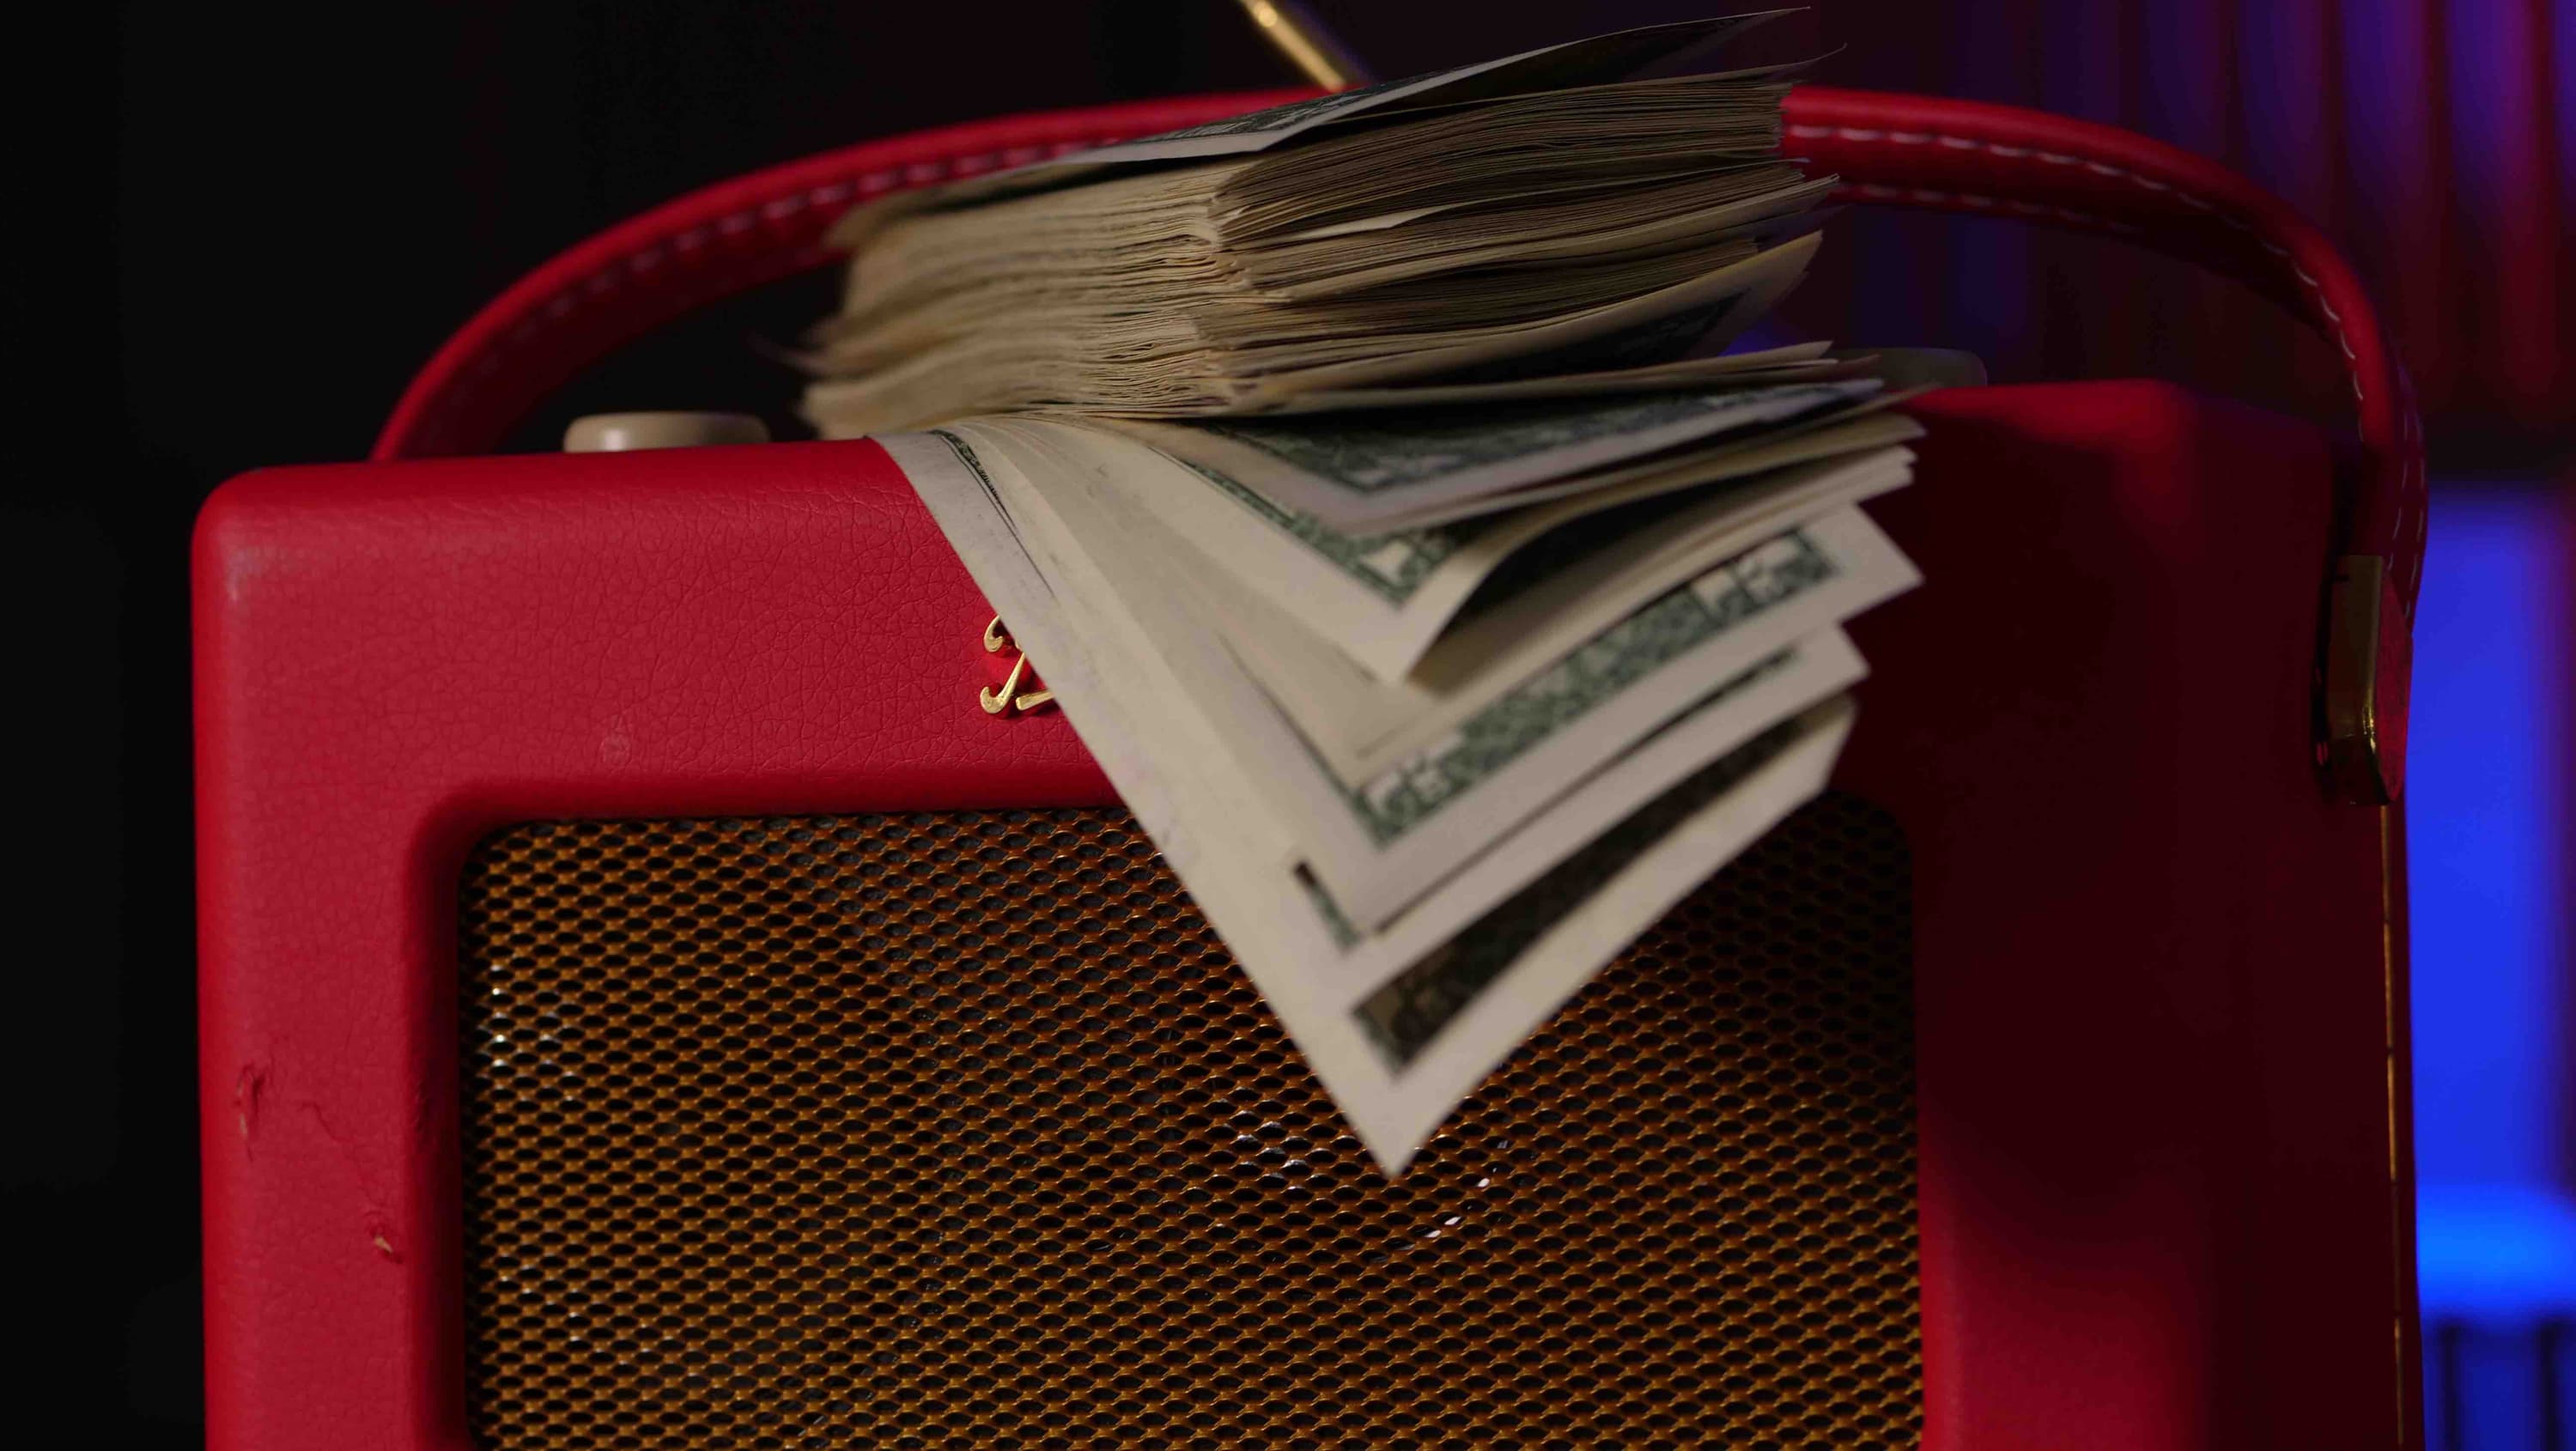 Image shows a stack of dollar bills on top of a red Roberts radio.